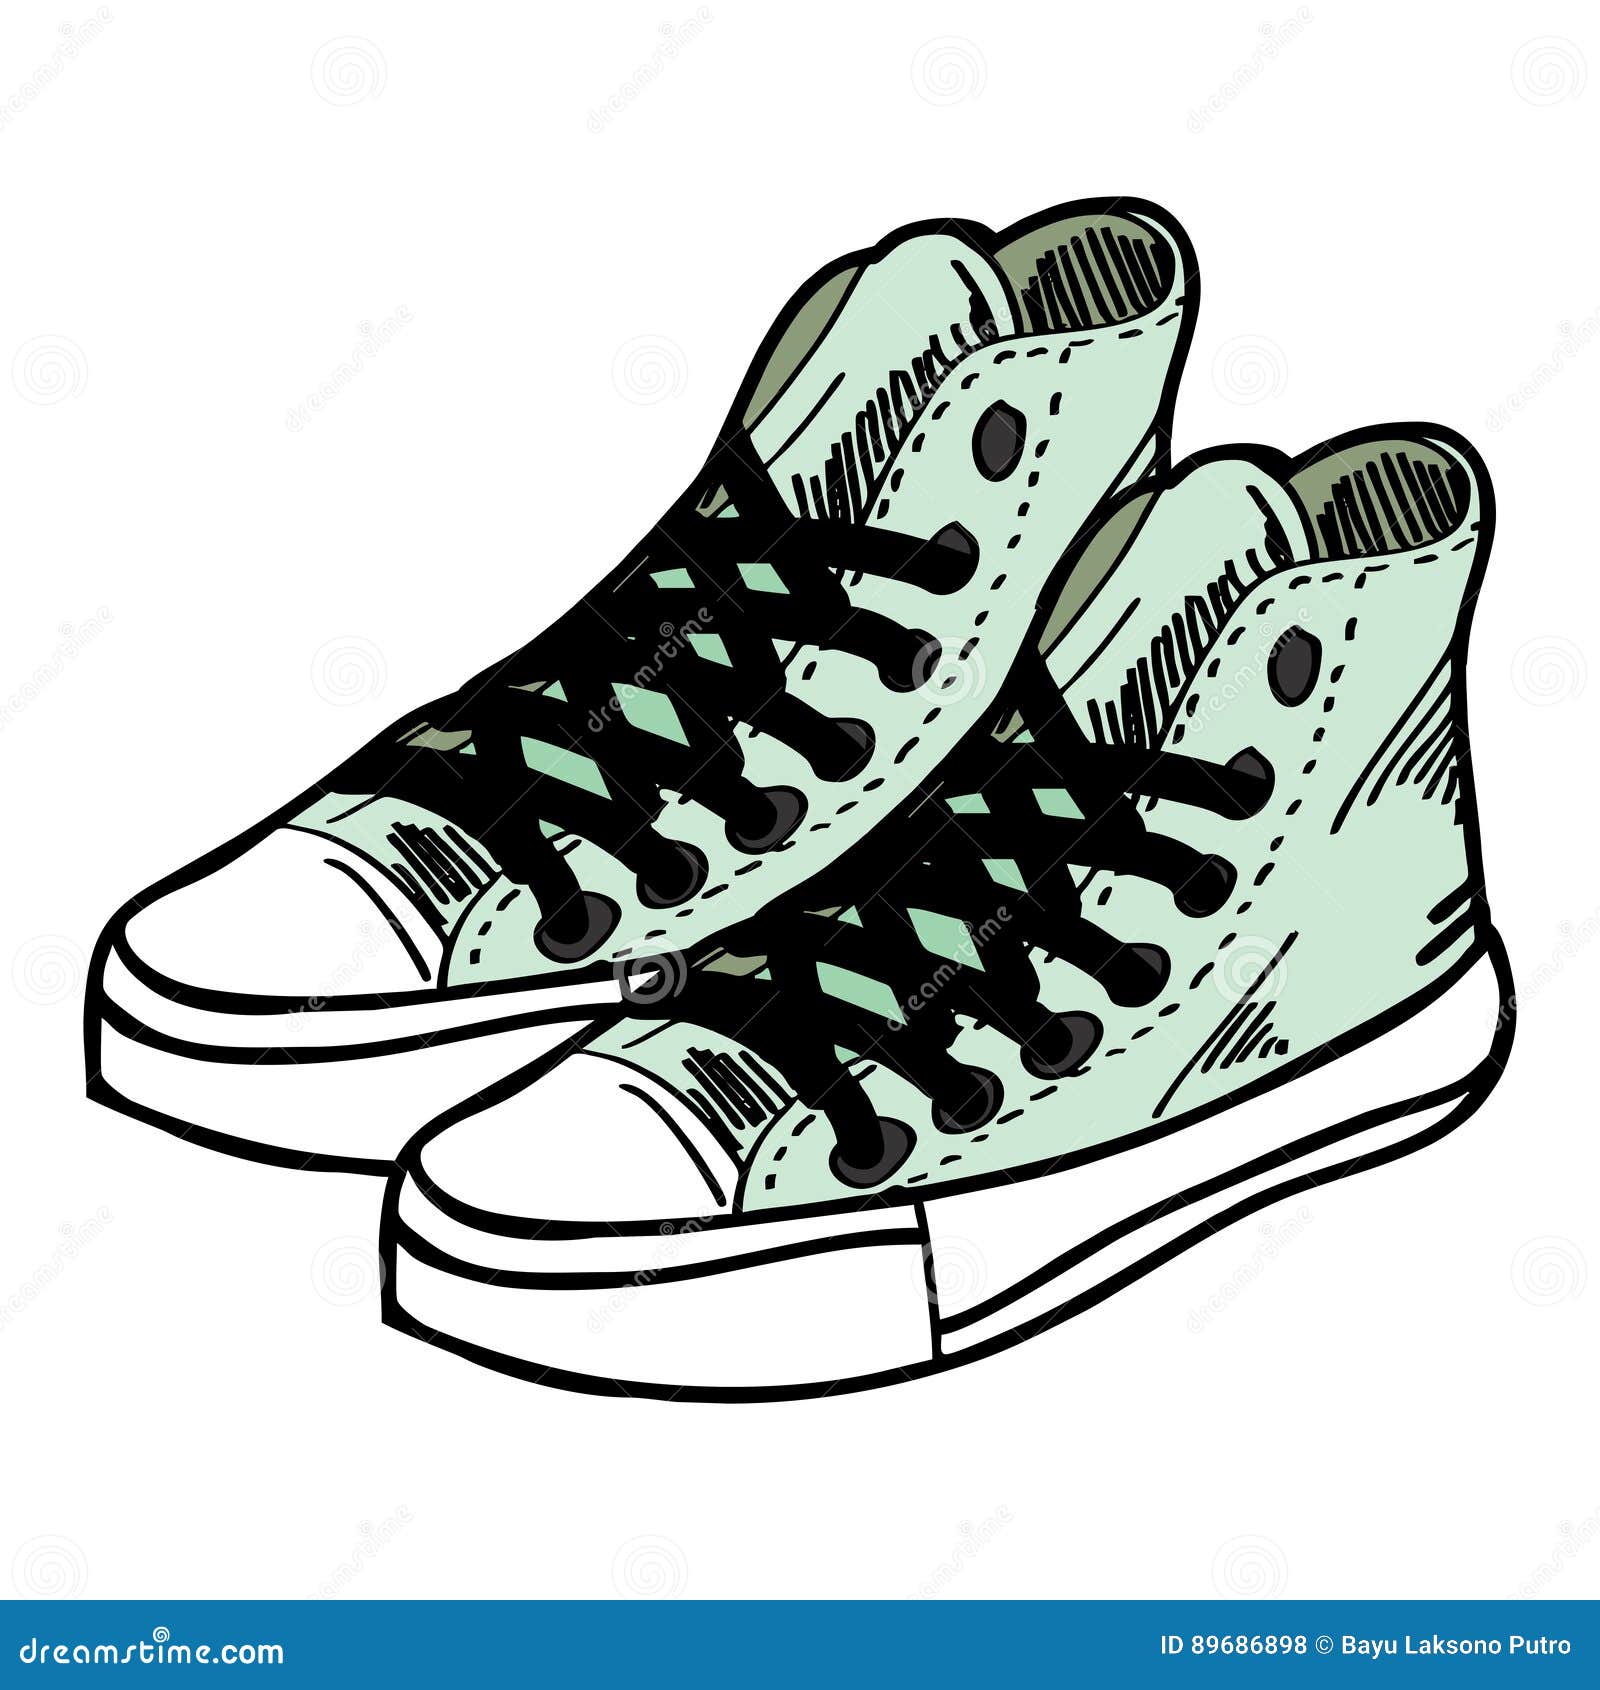 Doodle hand draw sneakers stock vector. Illustration of brave - 89686898